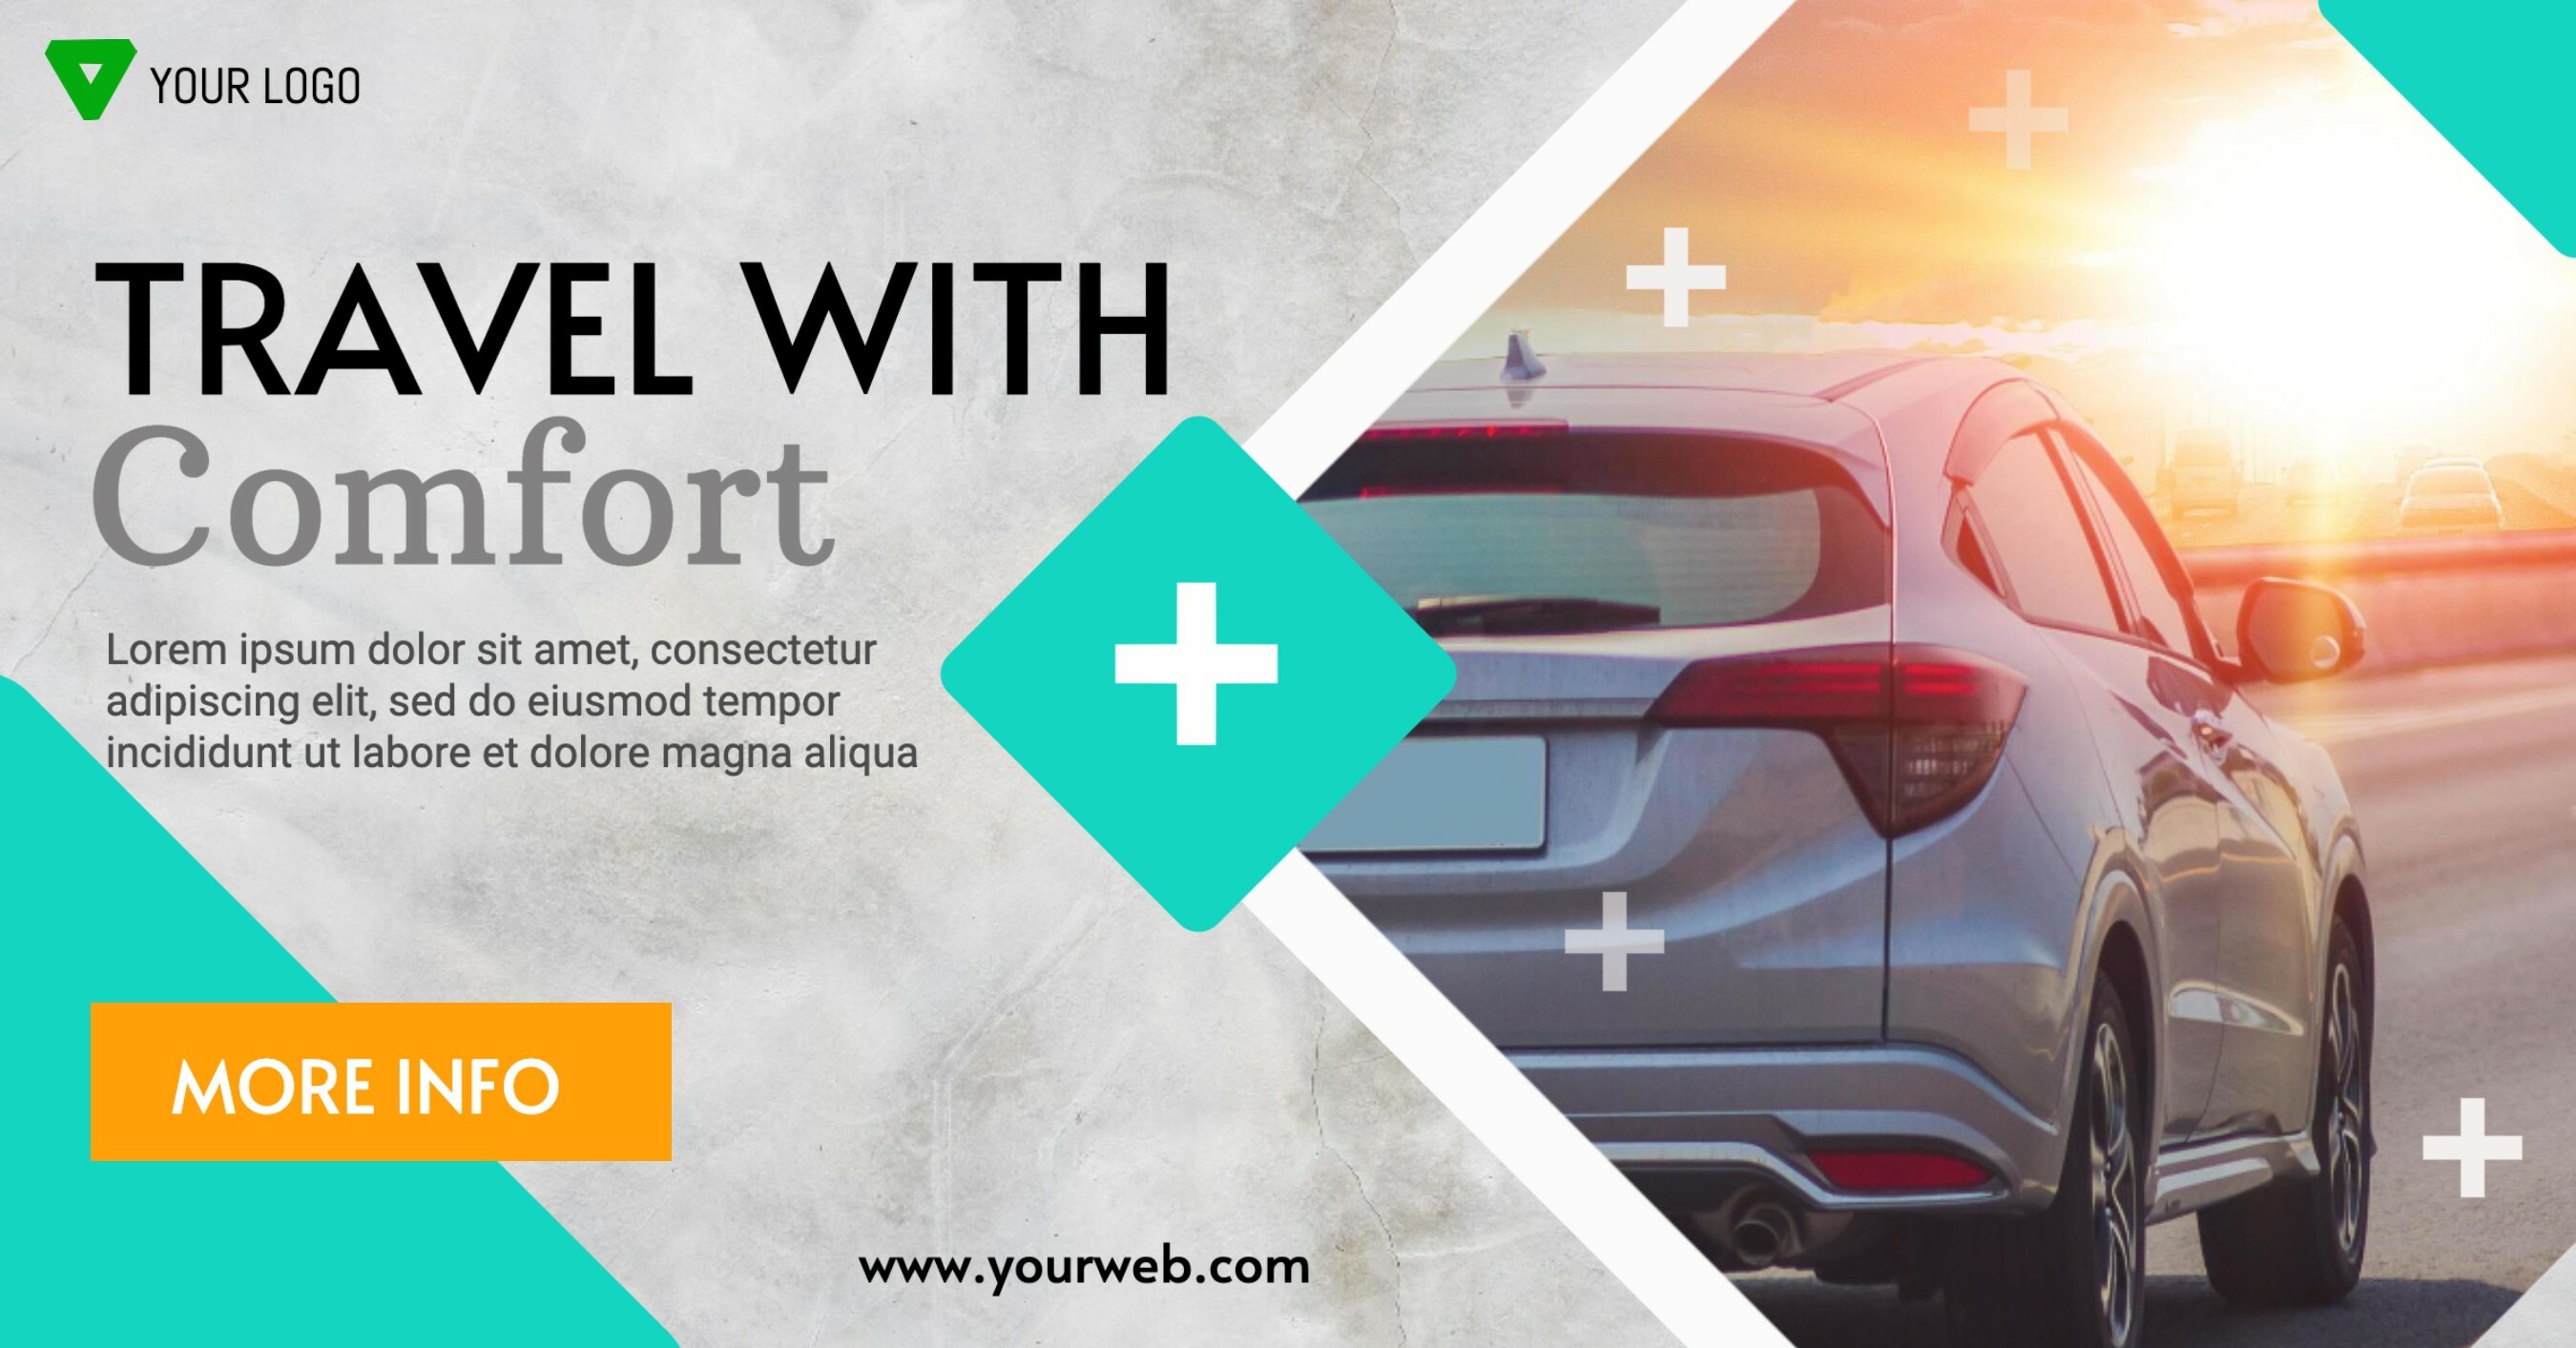 Travel with Comfort template